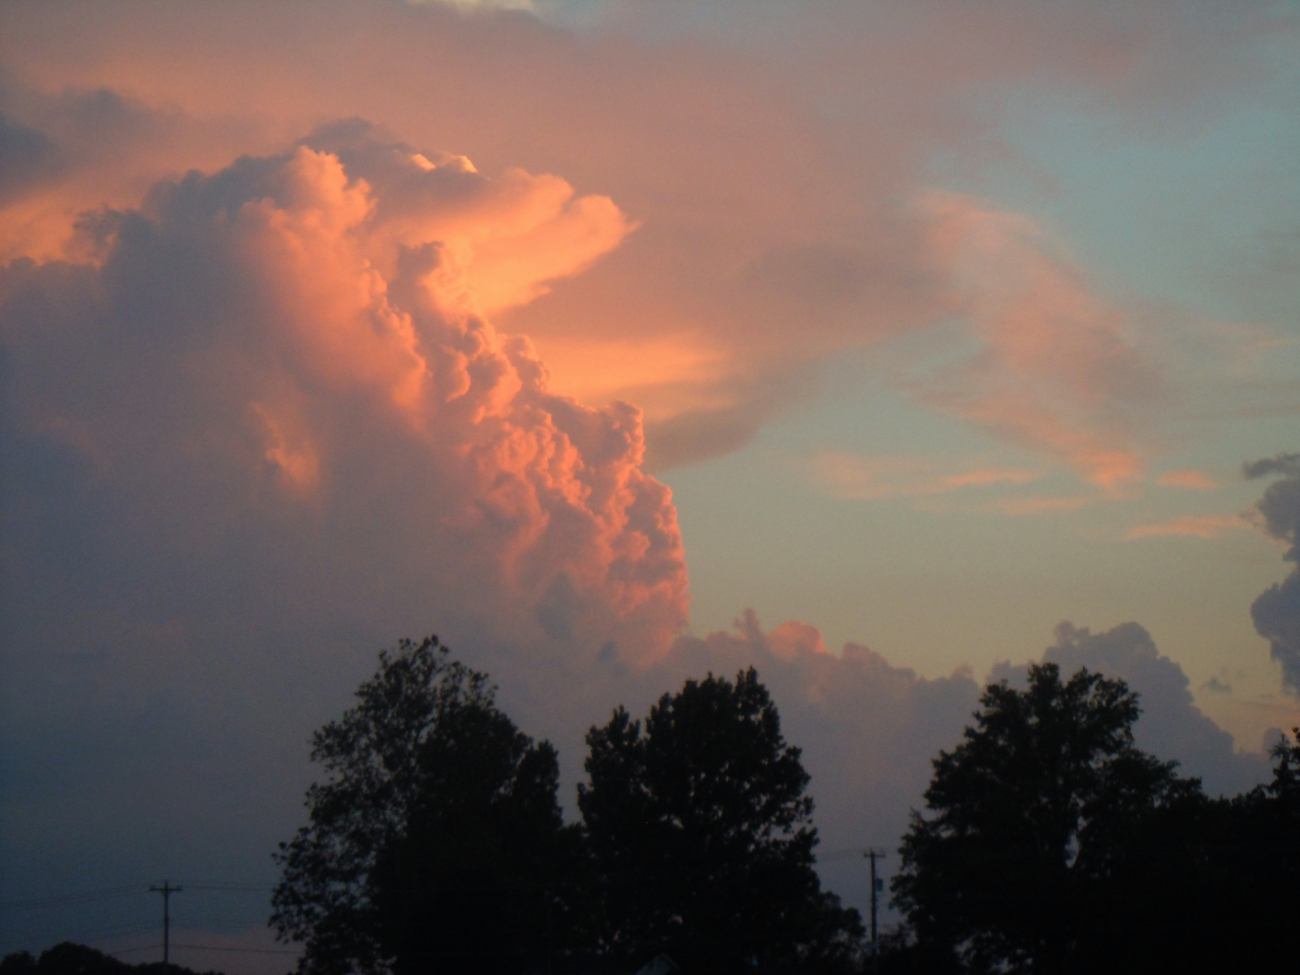 Picture taken at sunset following severe weather and tornado outbreak